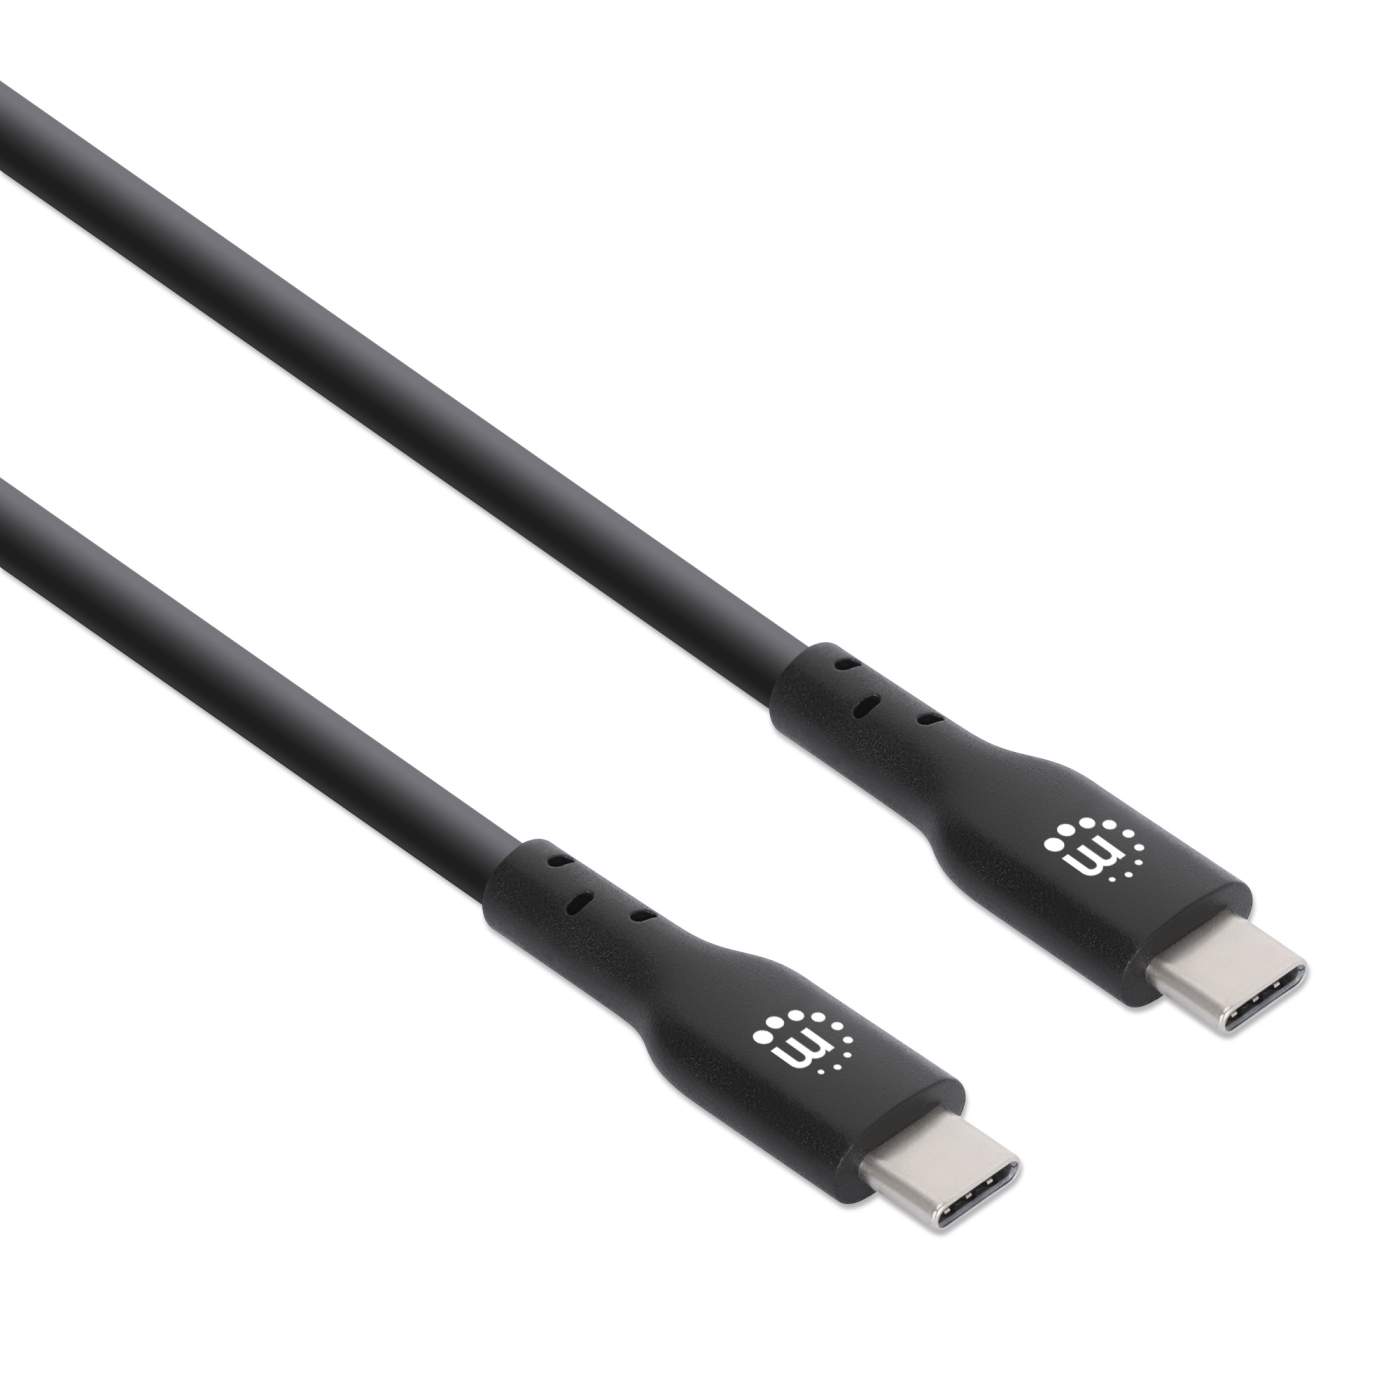 2m USB Cable, Cable, Replacement of Original Part for Wire : .in:  Computers & Accessories